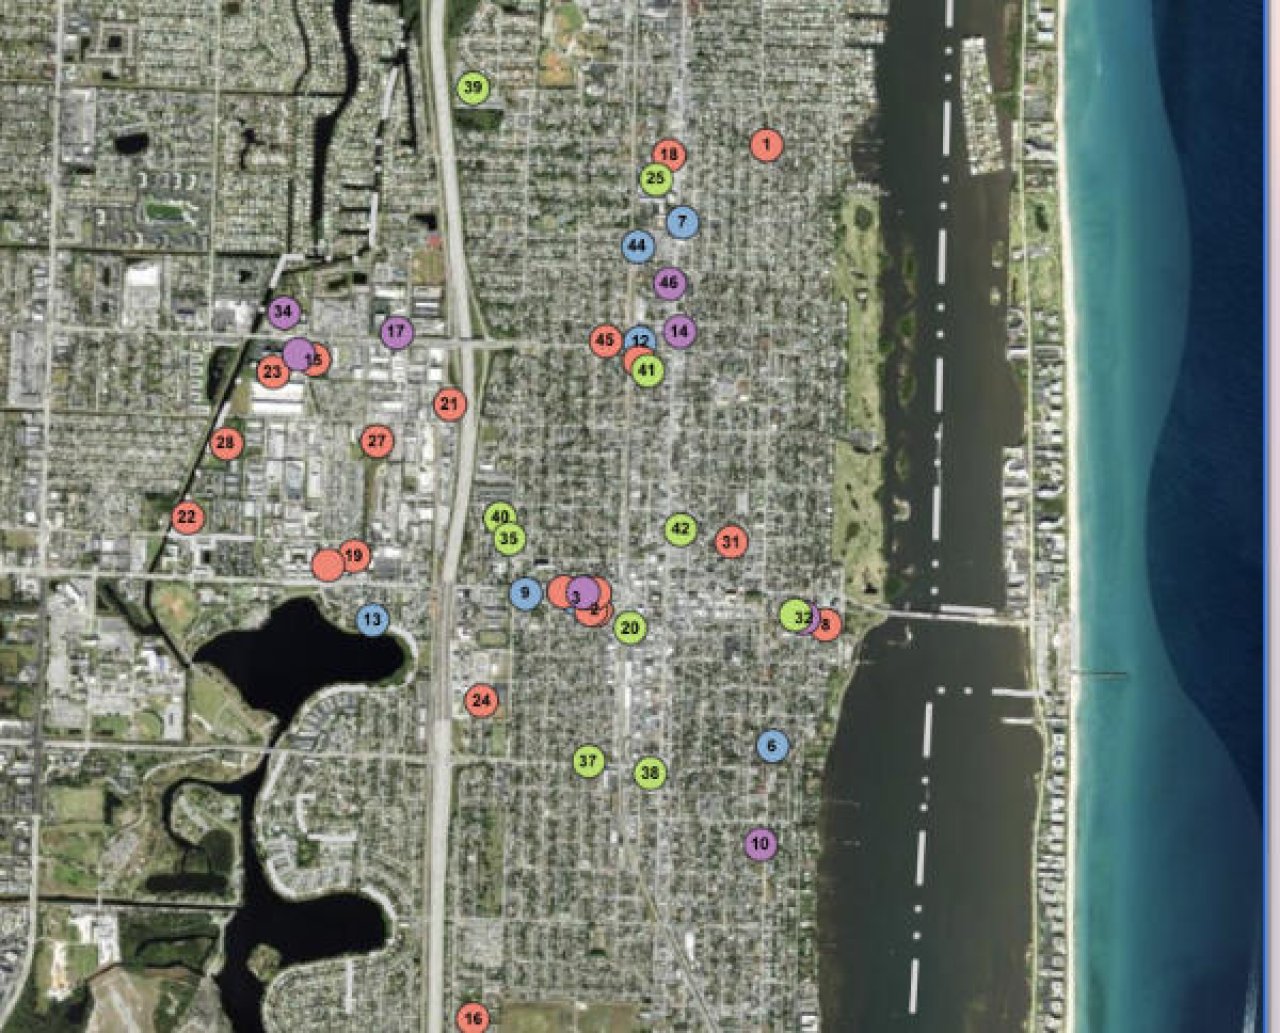 locations marked in city of lake worth beach on map.